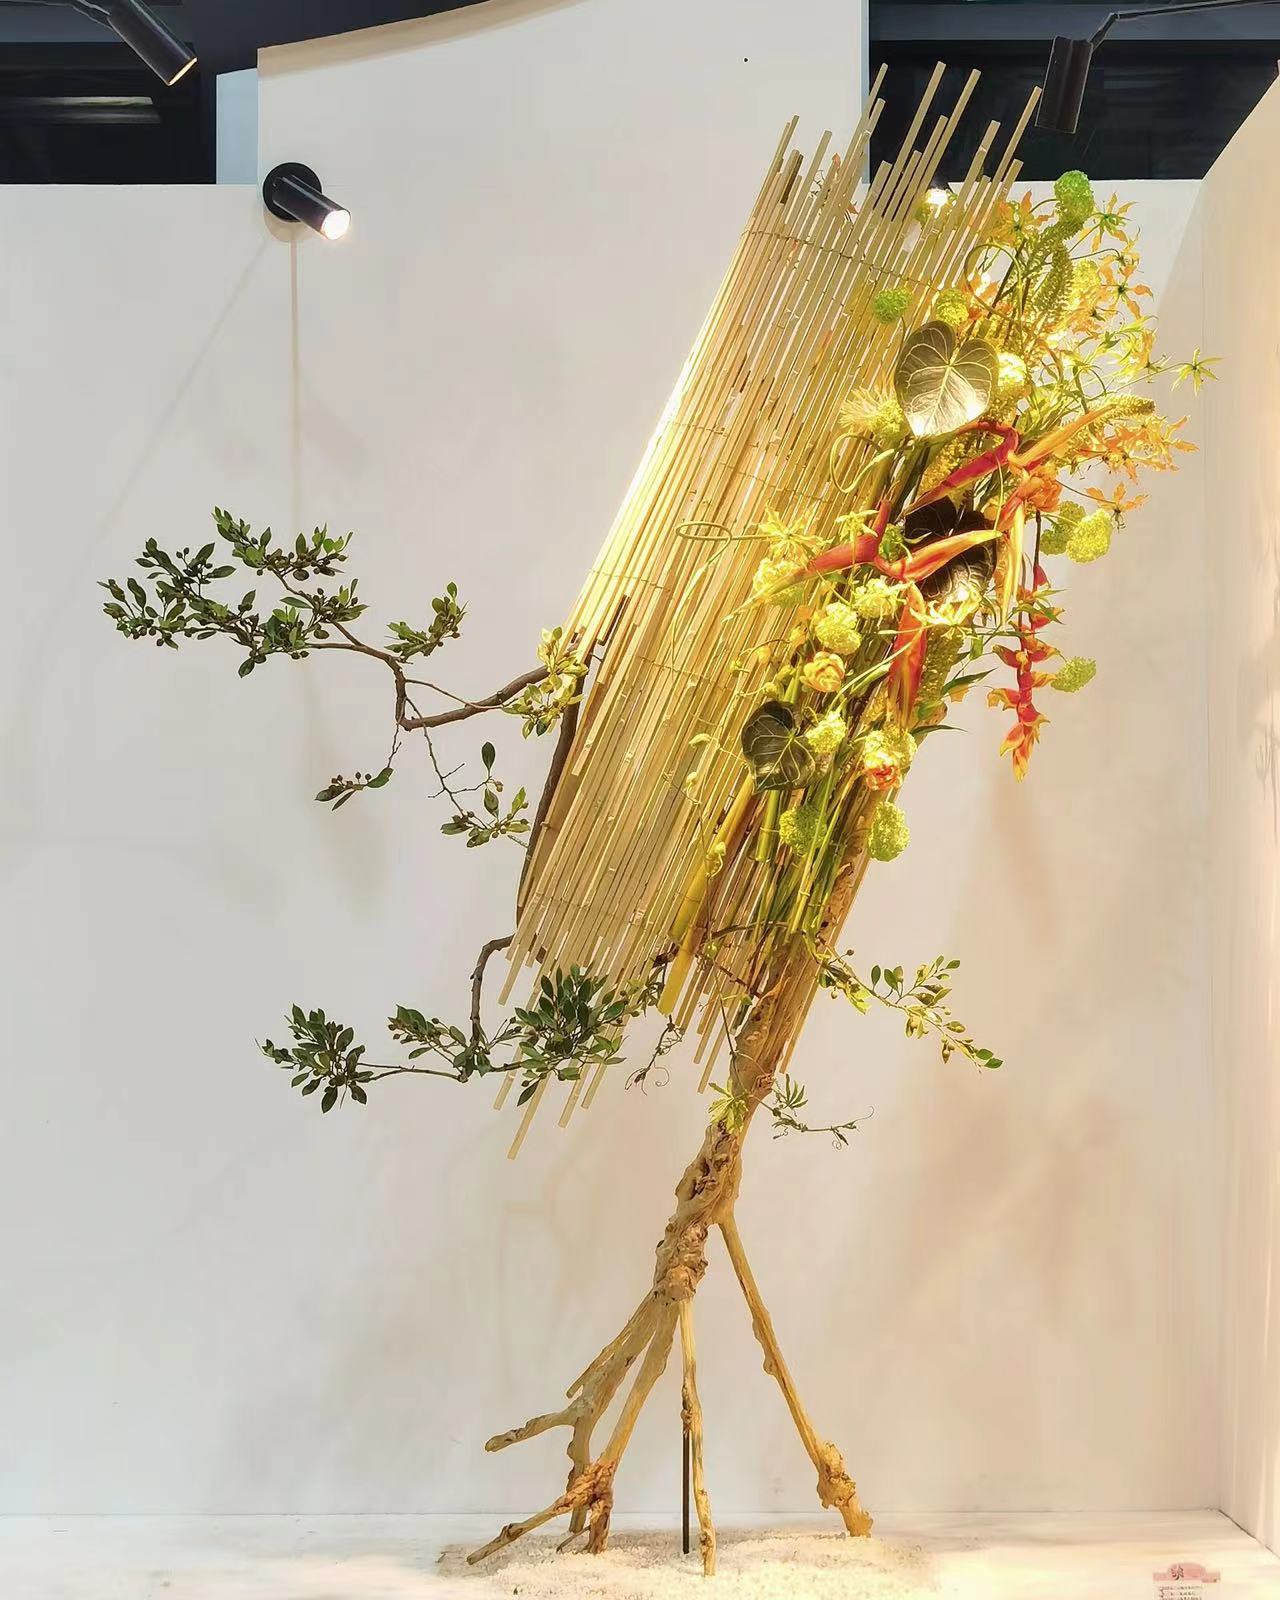 A flower-arranging work by Pan Shenhan. /Photo provided to CGTN